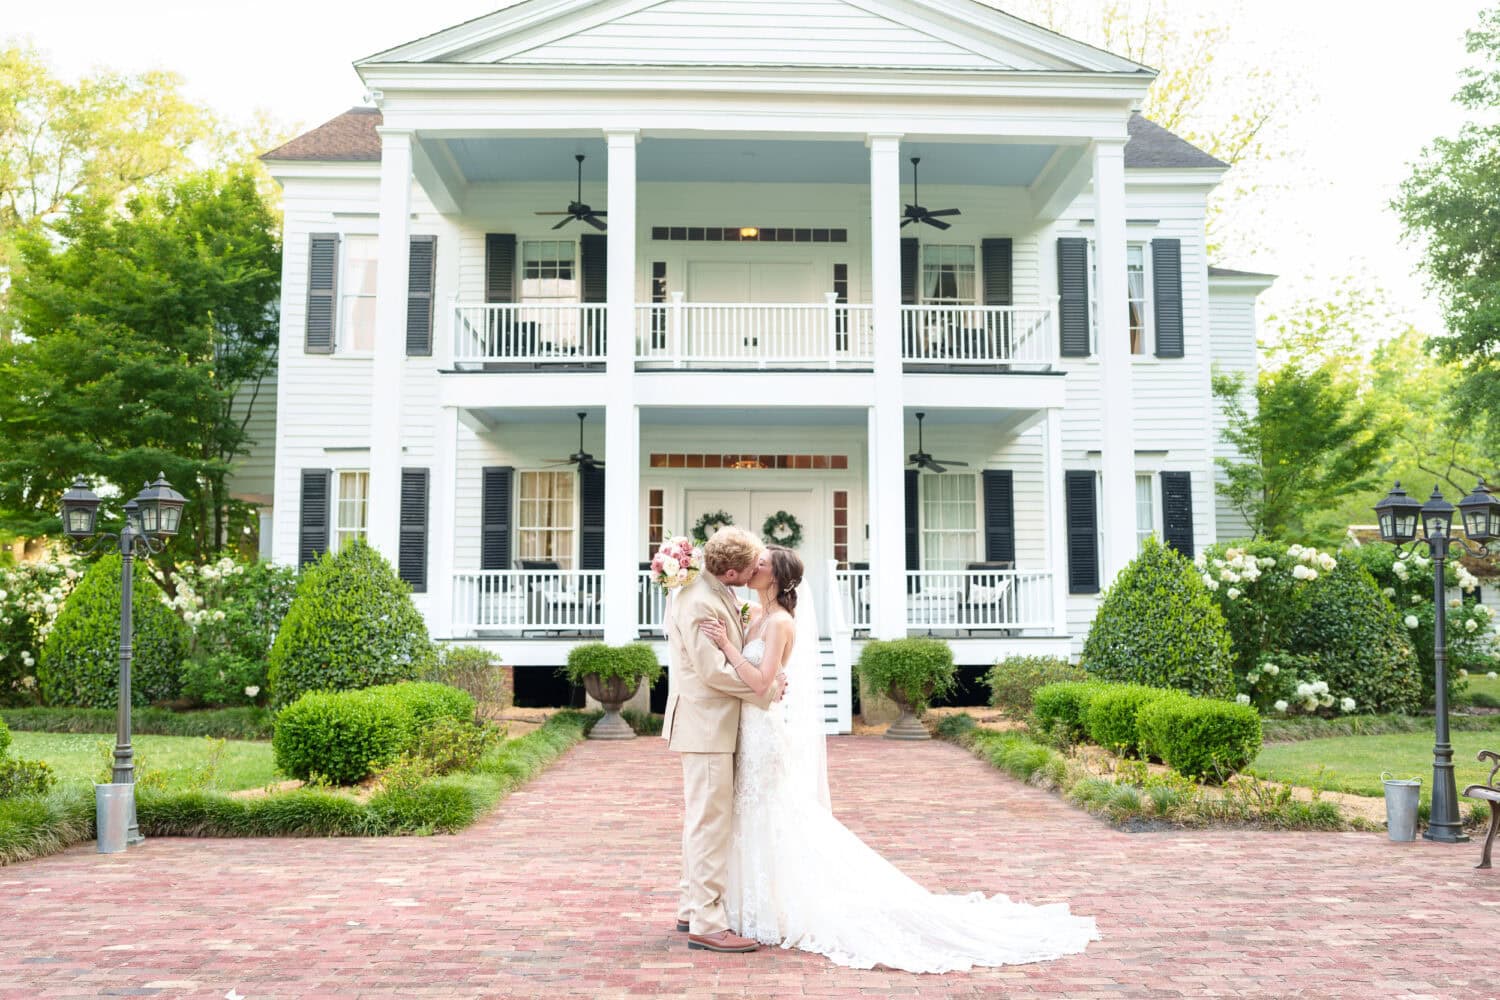 Portraits of bride and groom in front of the plantation house - Tanglewood Plantation